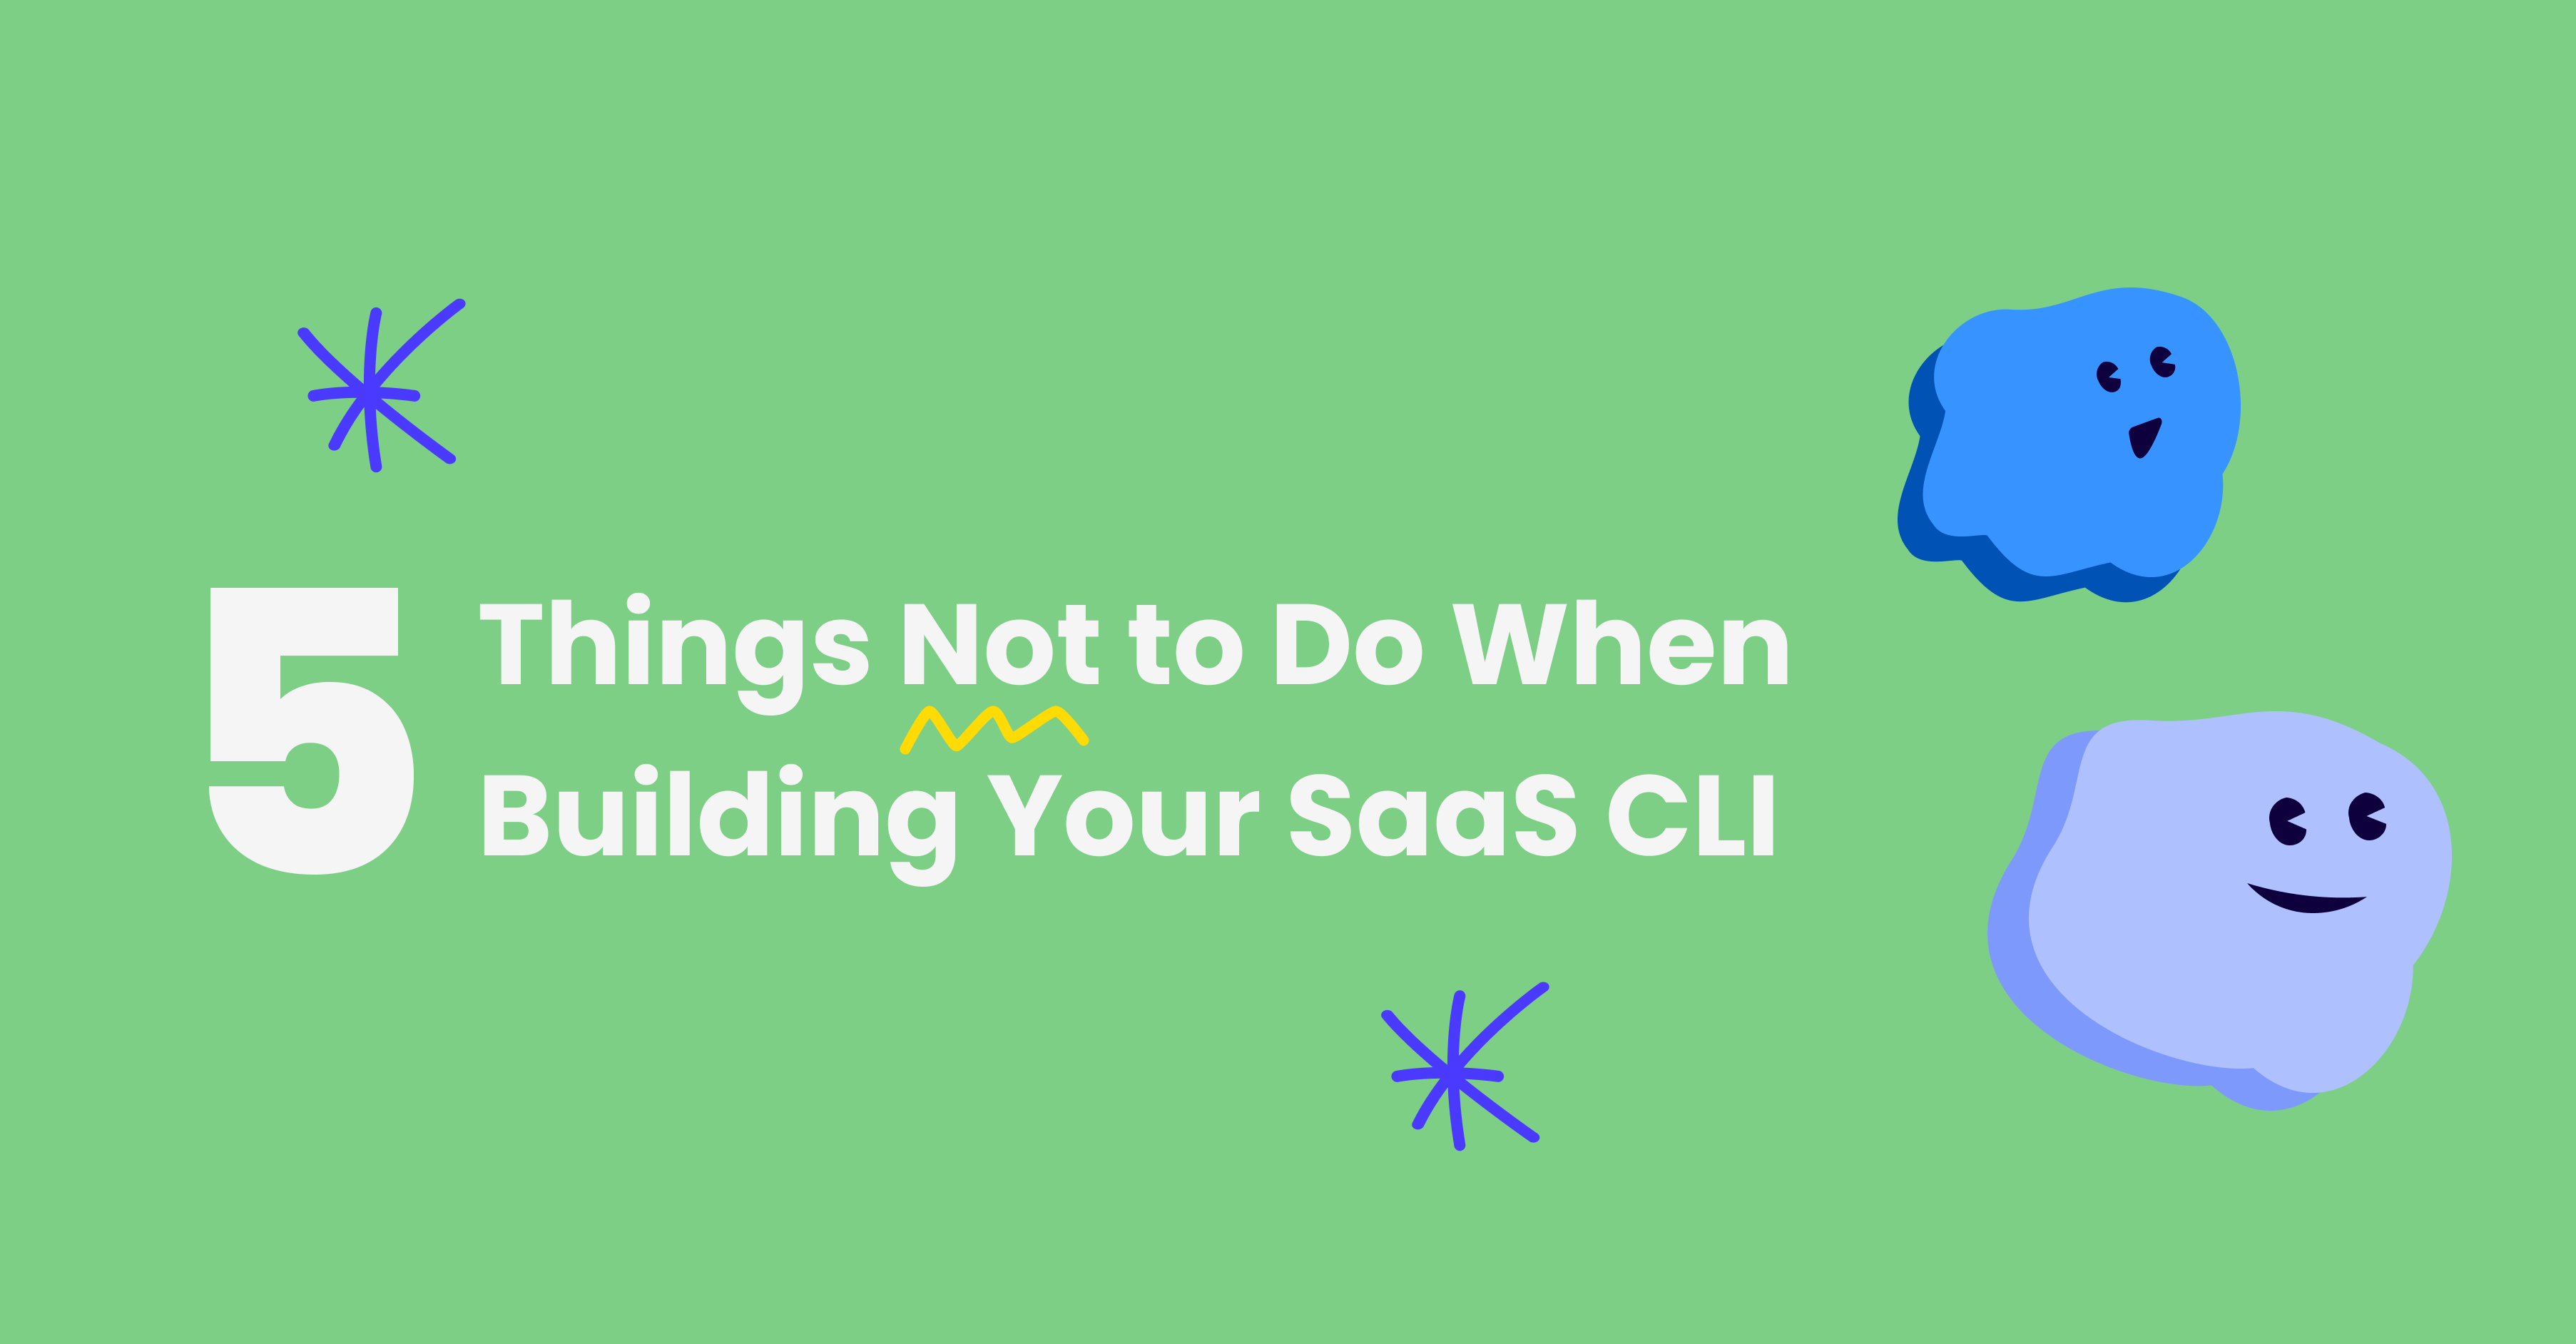 Five Things Not to Do When Building Your SaaS CLI